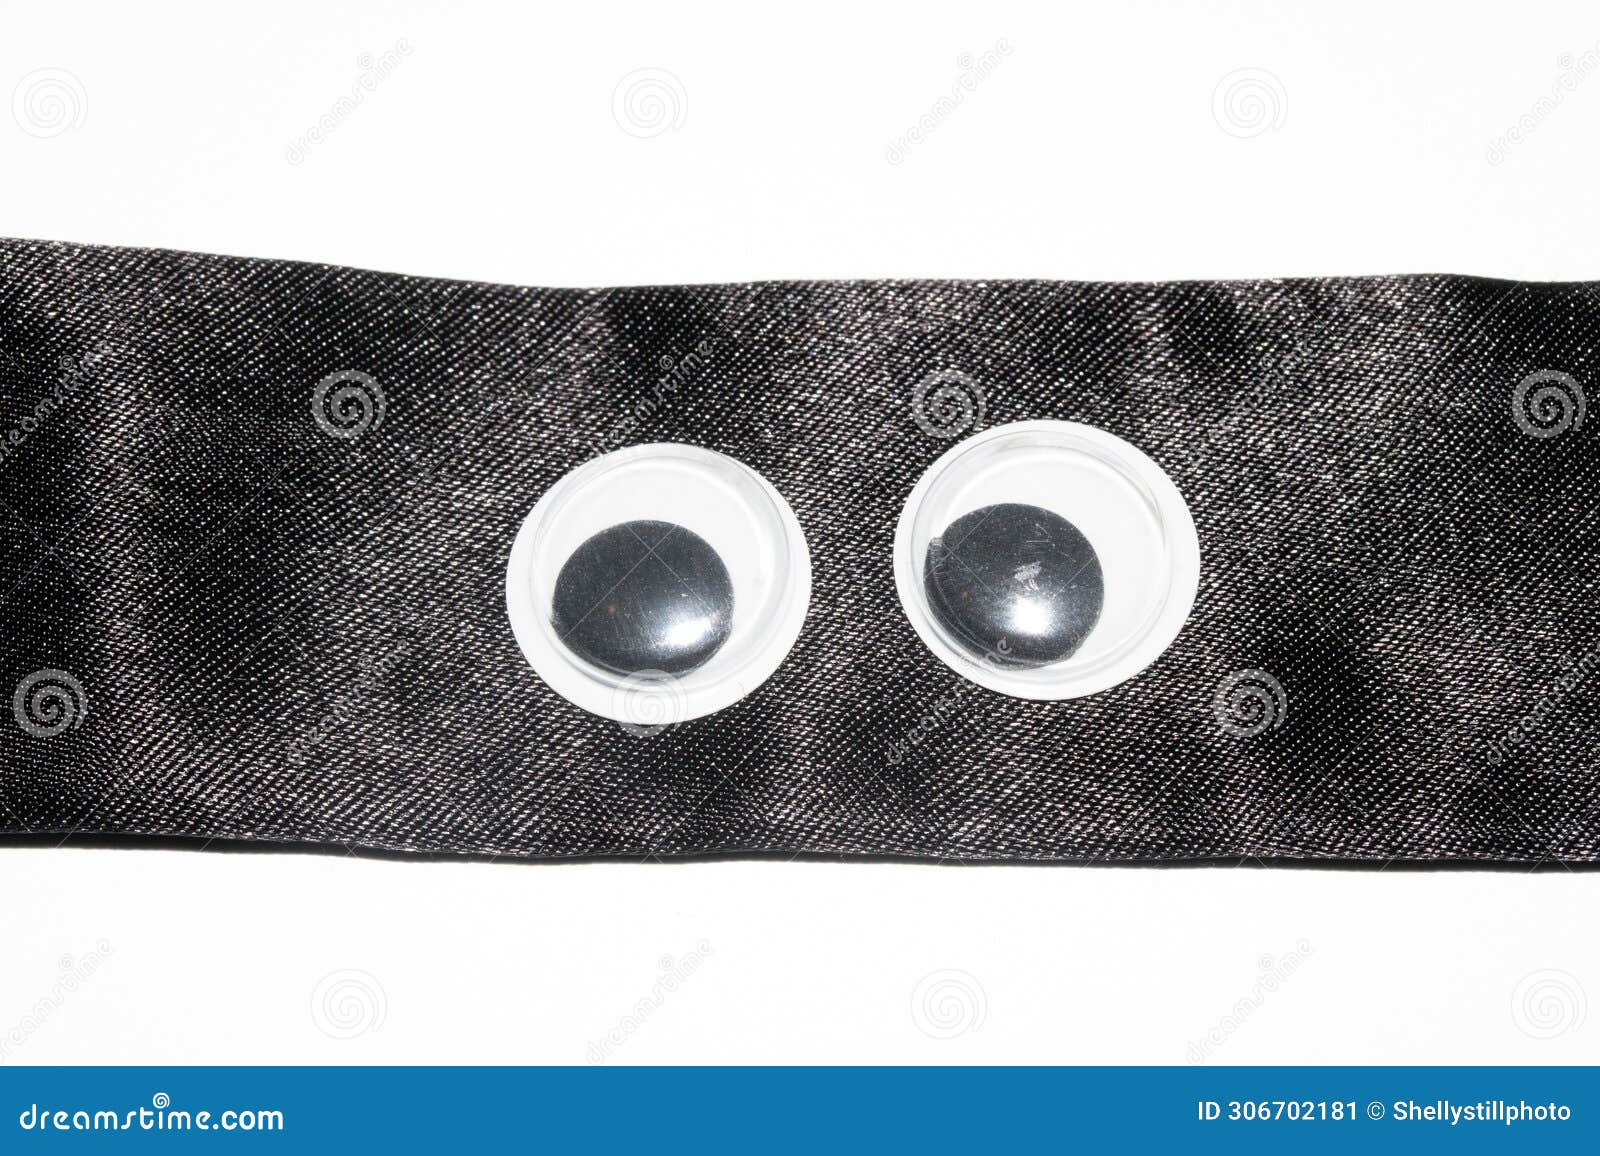 funny wiggle google eyes on fabric silly background